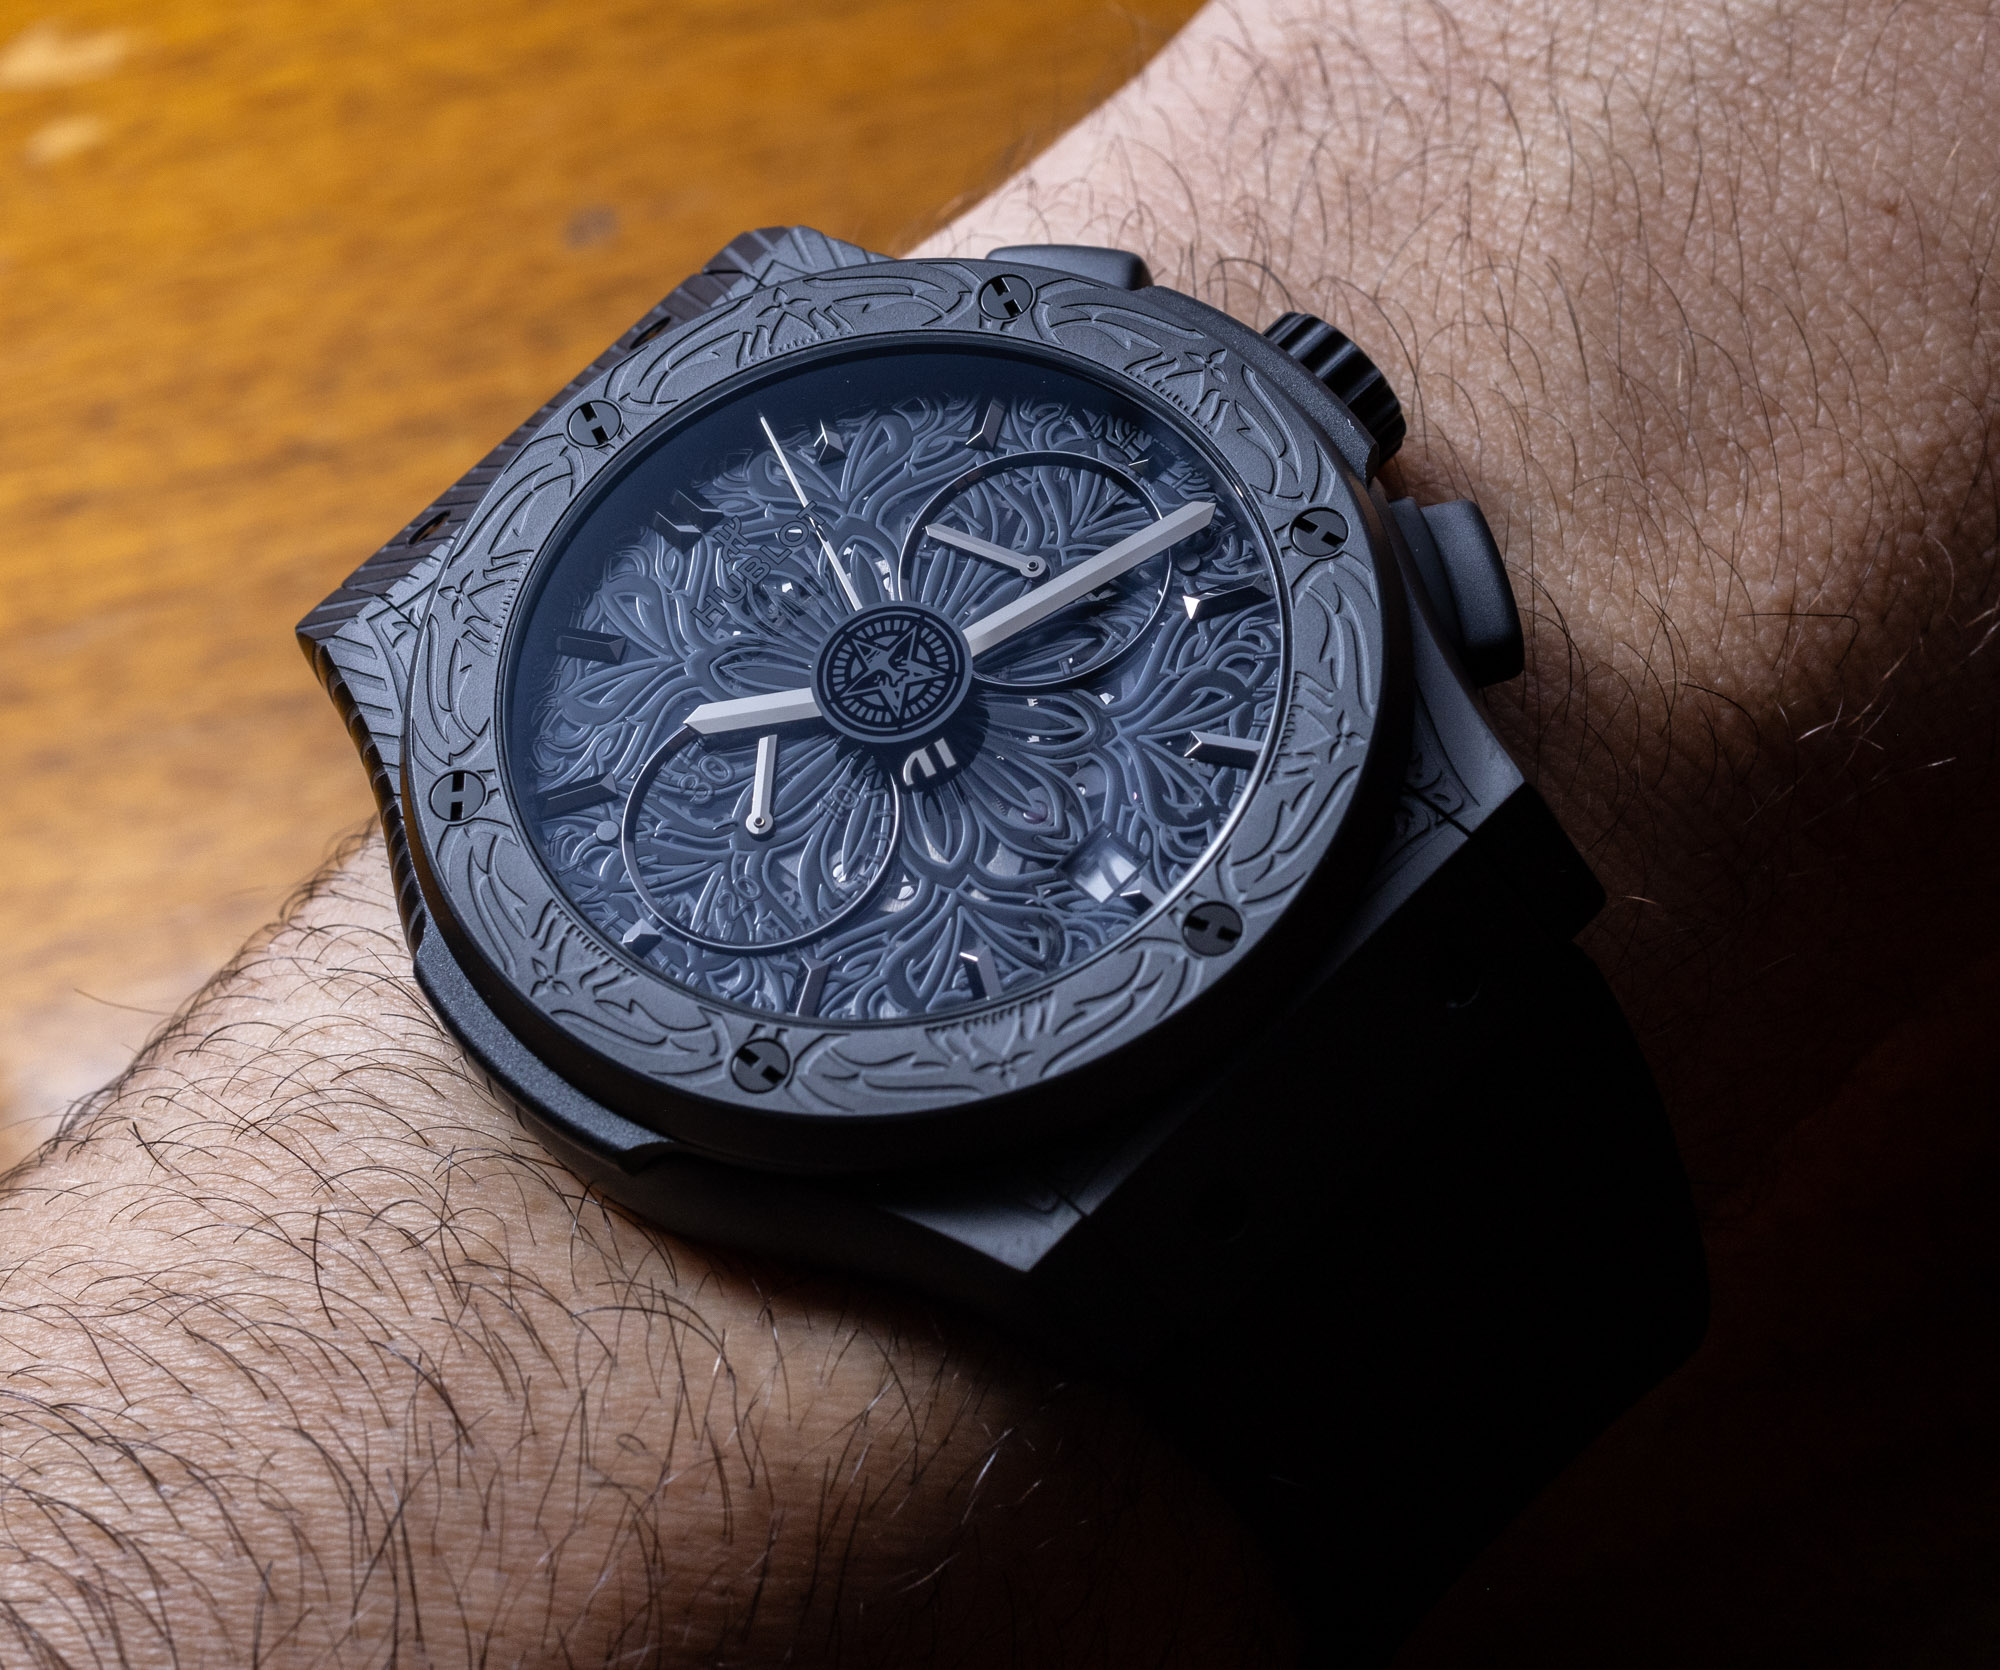 Hands-On: Limited-Edition Hublot Classic Fusion Aerofusion